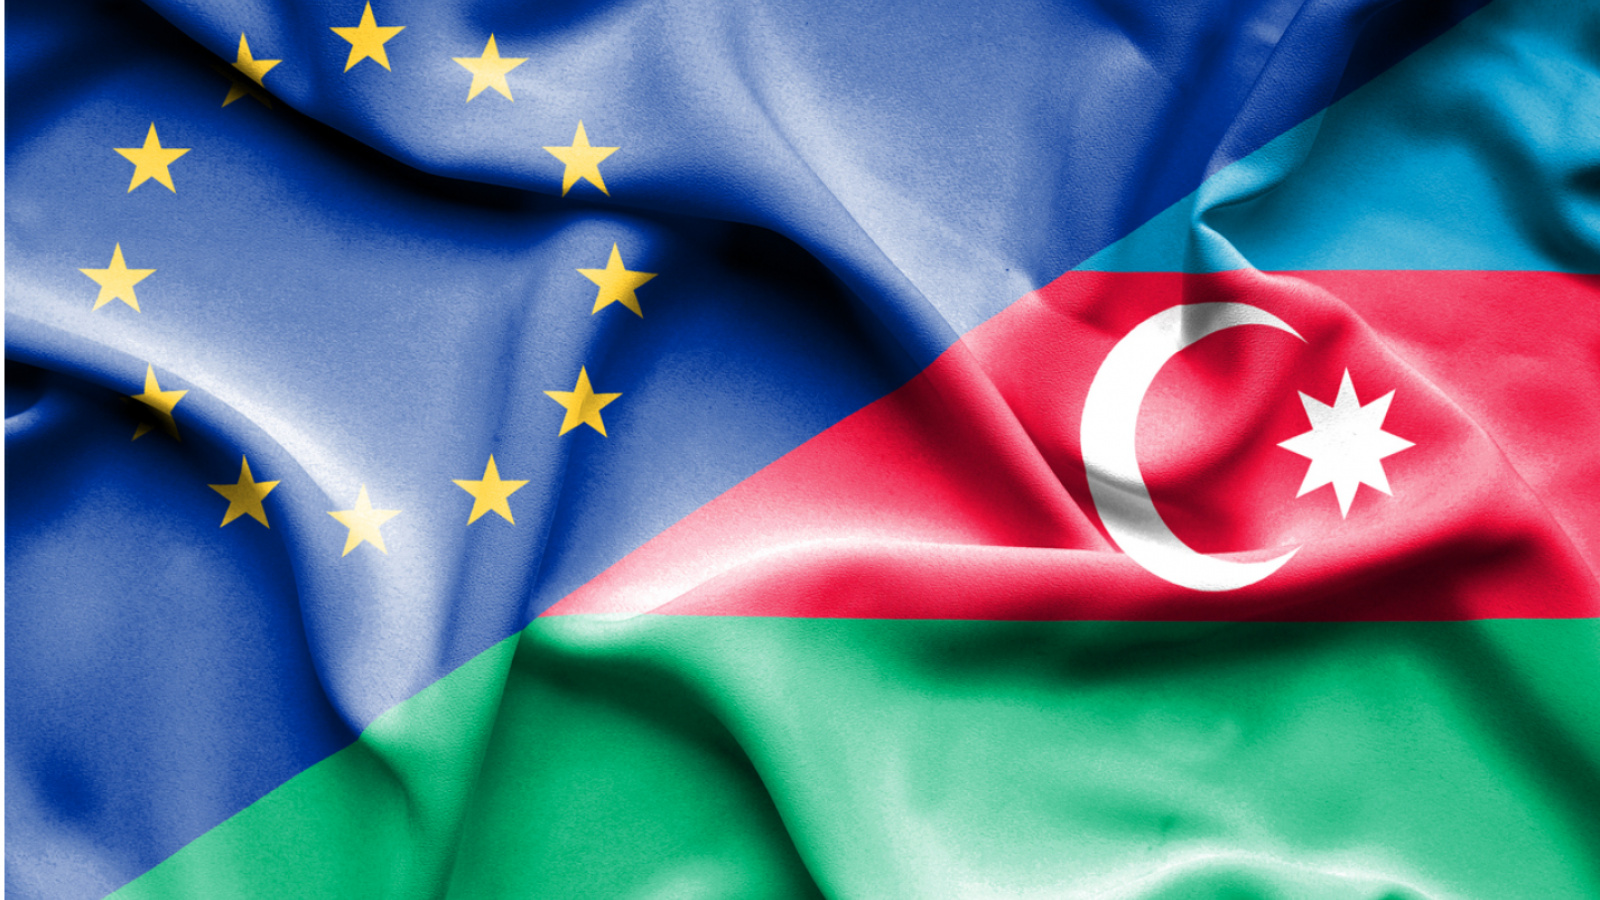 ‘Southern Gas Corridor enables secure, reliable and competitive supply of gas from Azerbaijan to Europe’: Joint statement from ministerial meeting of the Southern Gas Corridor Advisory Council